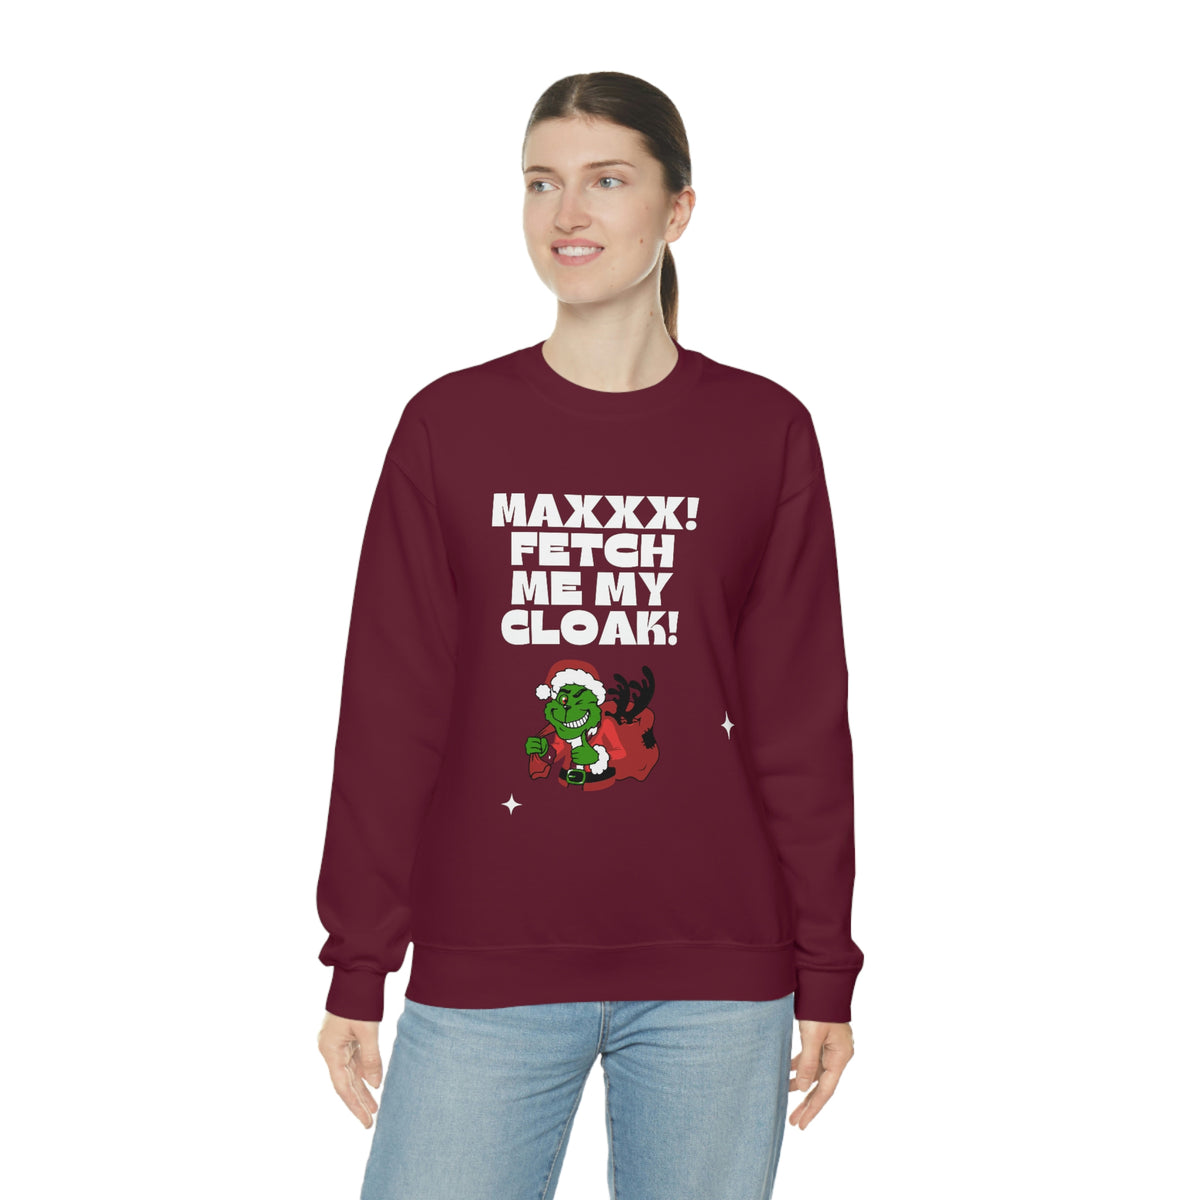 The Grinch Holiday Sweatshirt, Max Fetch Me My Cloak Funny Pullover for the Holidays, Grinch Gifts